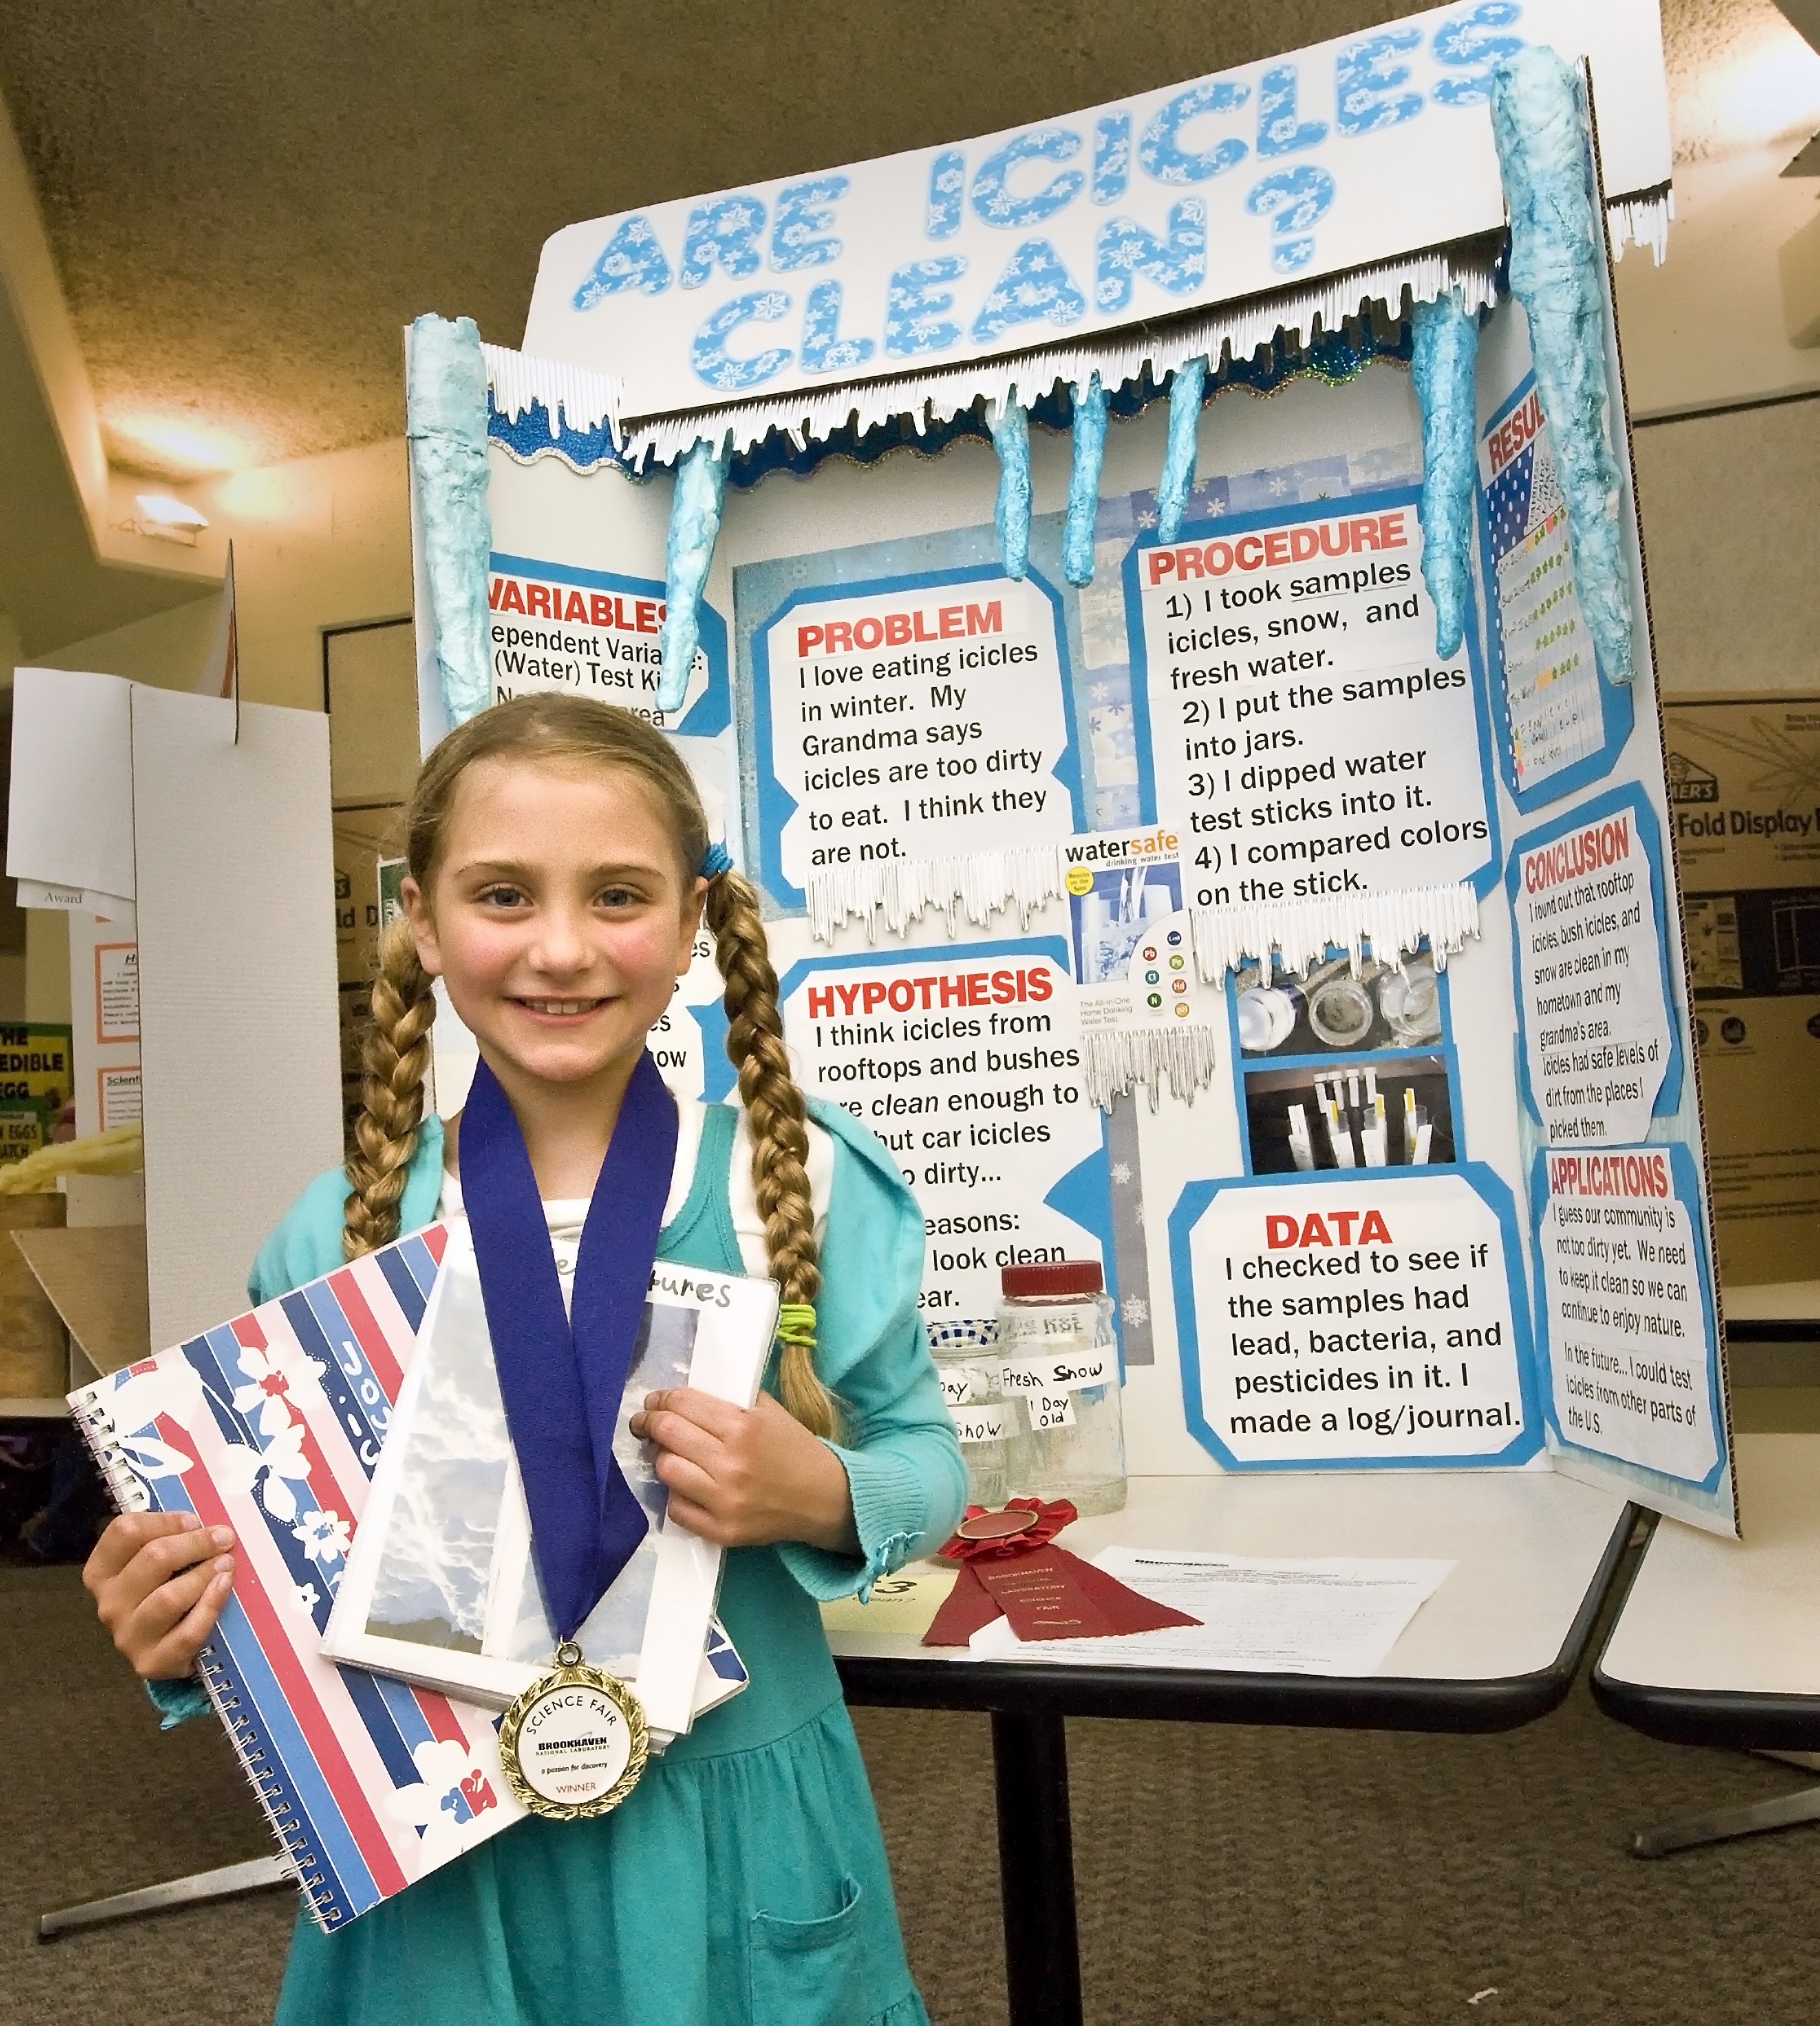 10 Perfect Science Fair Project Ideas 4Th Grade from ant control to wind energy winning projects at brookhaven 7 2022